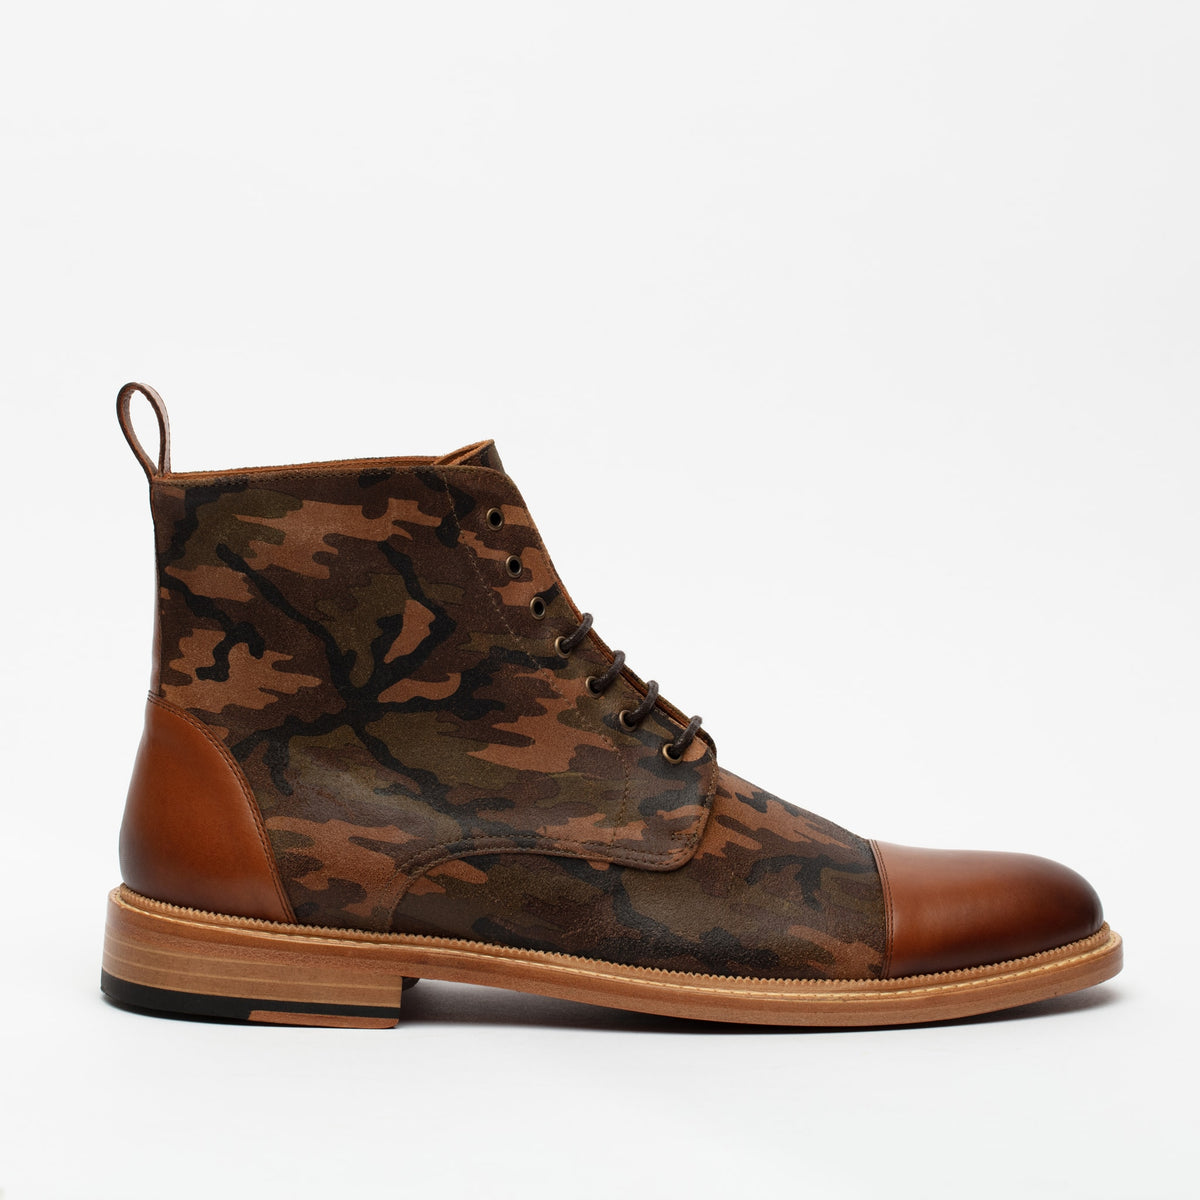 Troy Boot in Camo side view